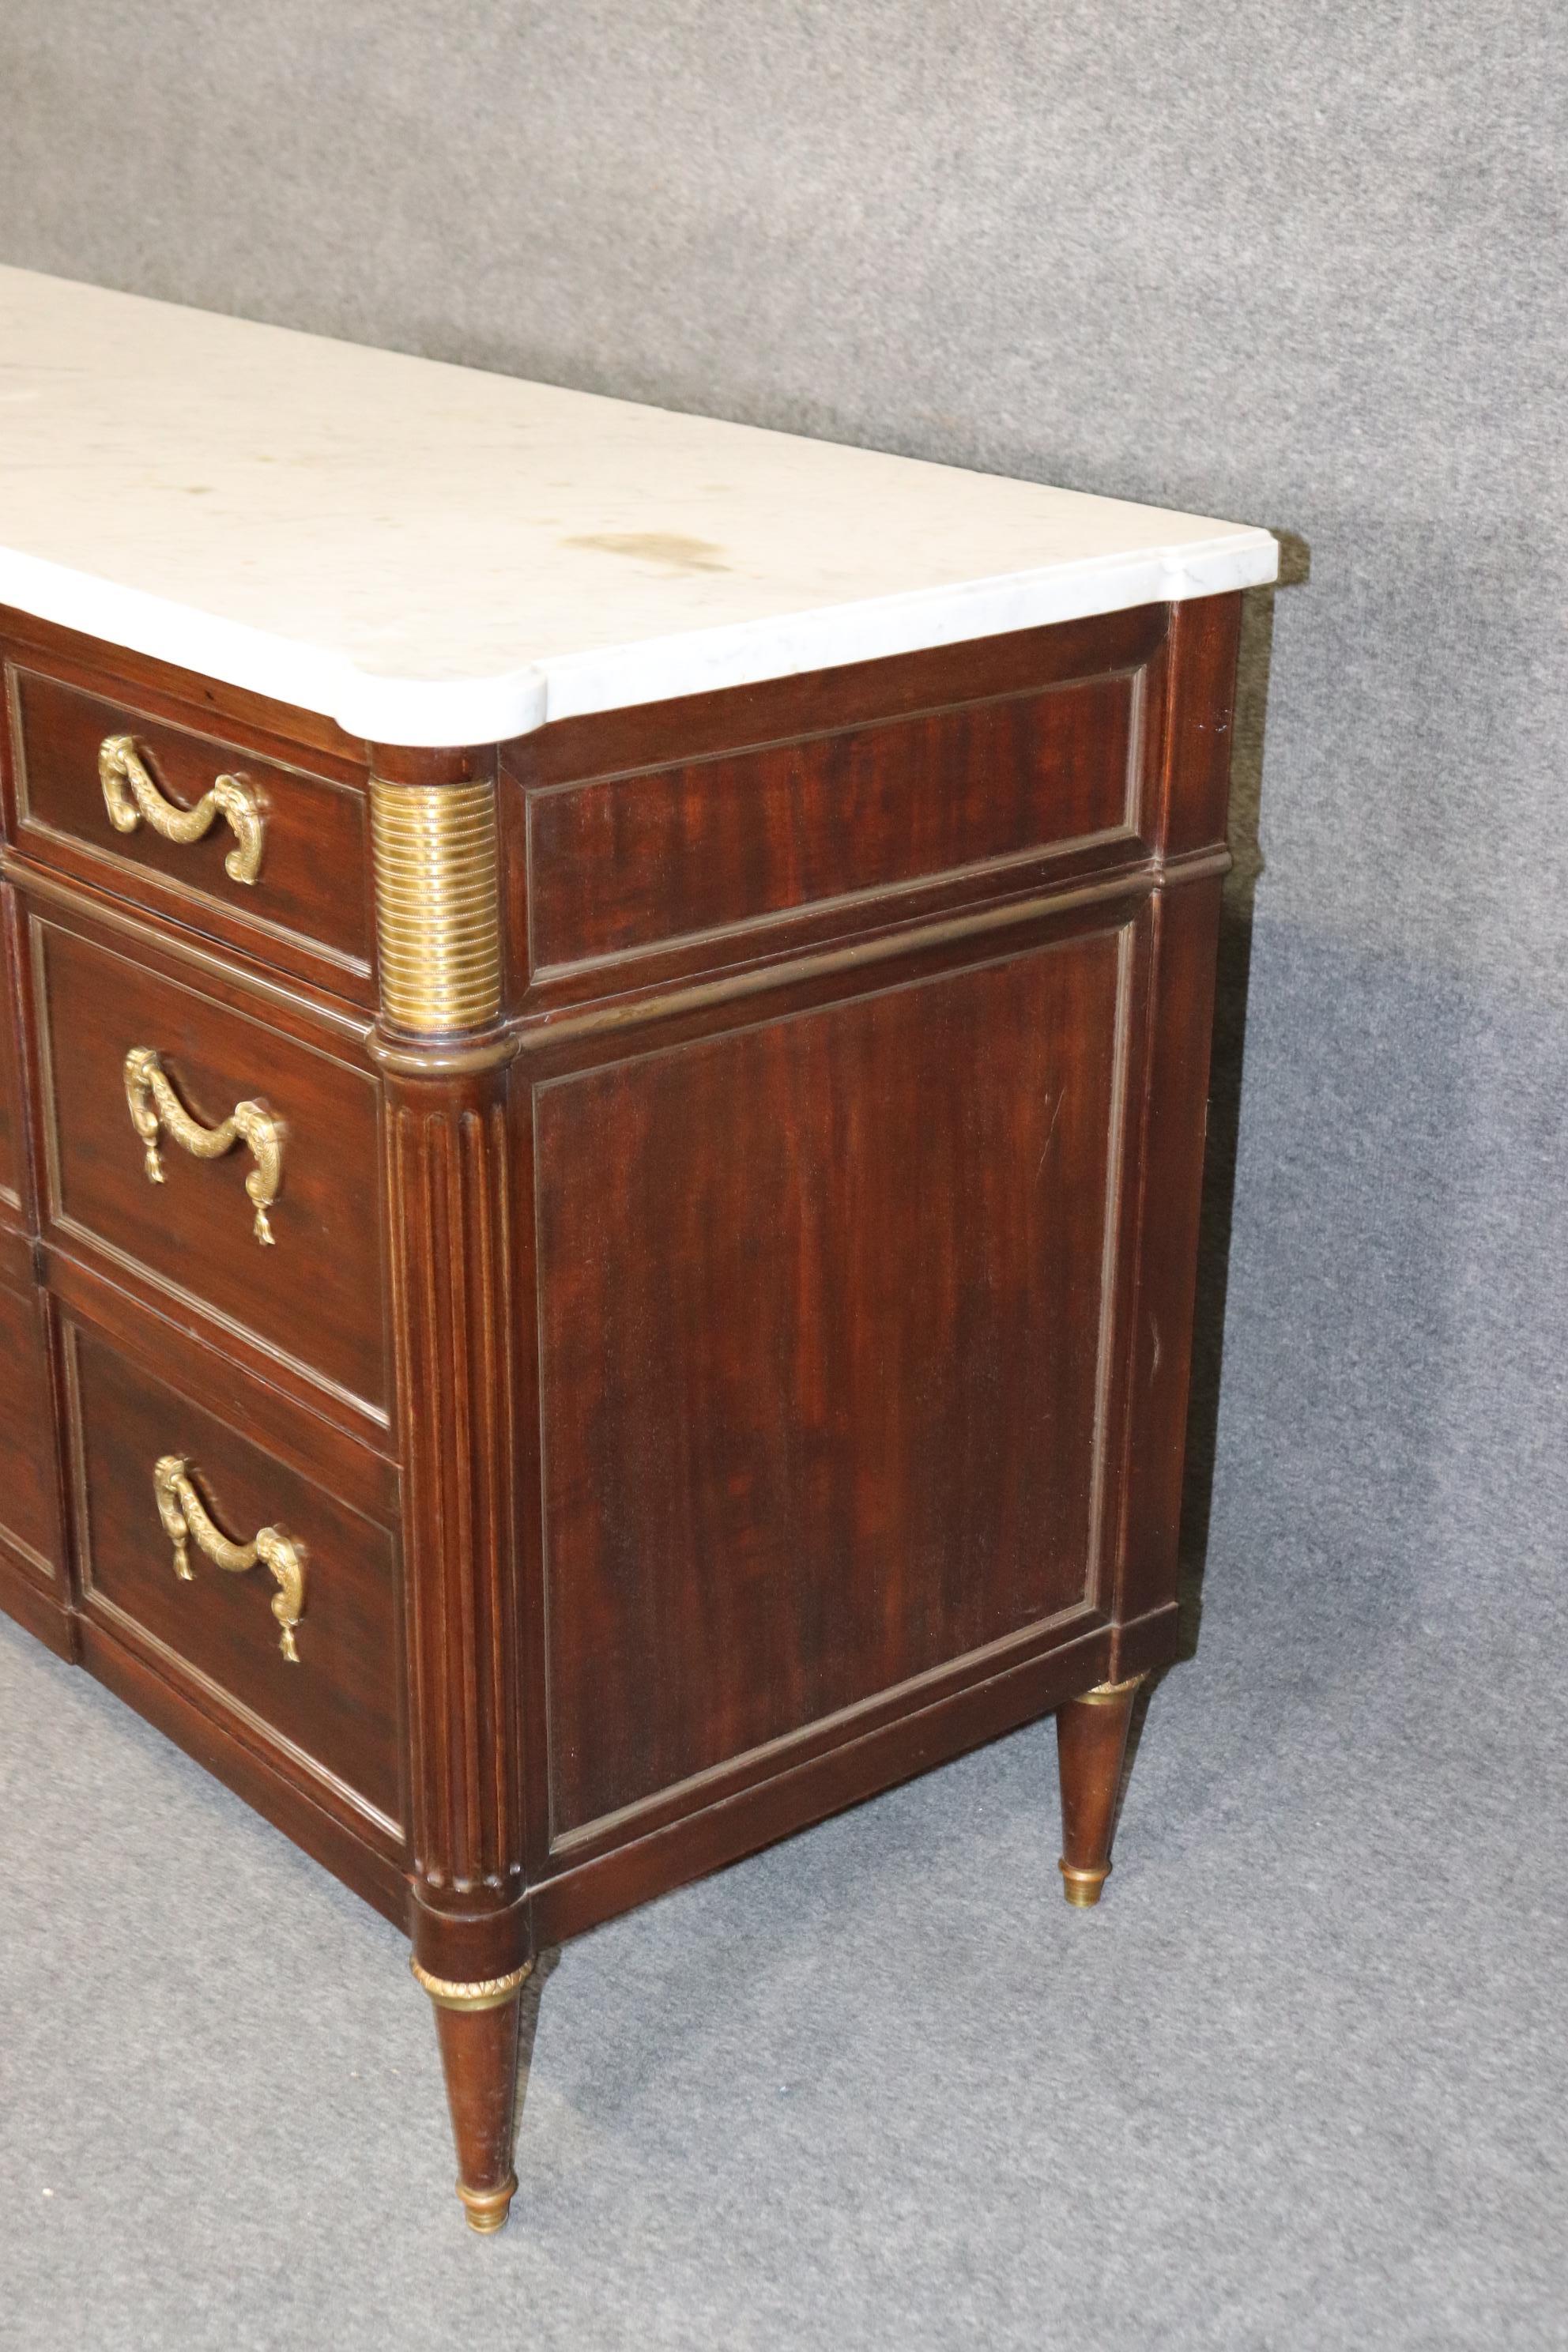 Mid-20th Century Signed Maison Jansen Mahogany Louis XVI Directoire Marble Top Commode Dresser For Sale